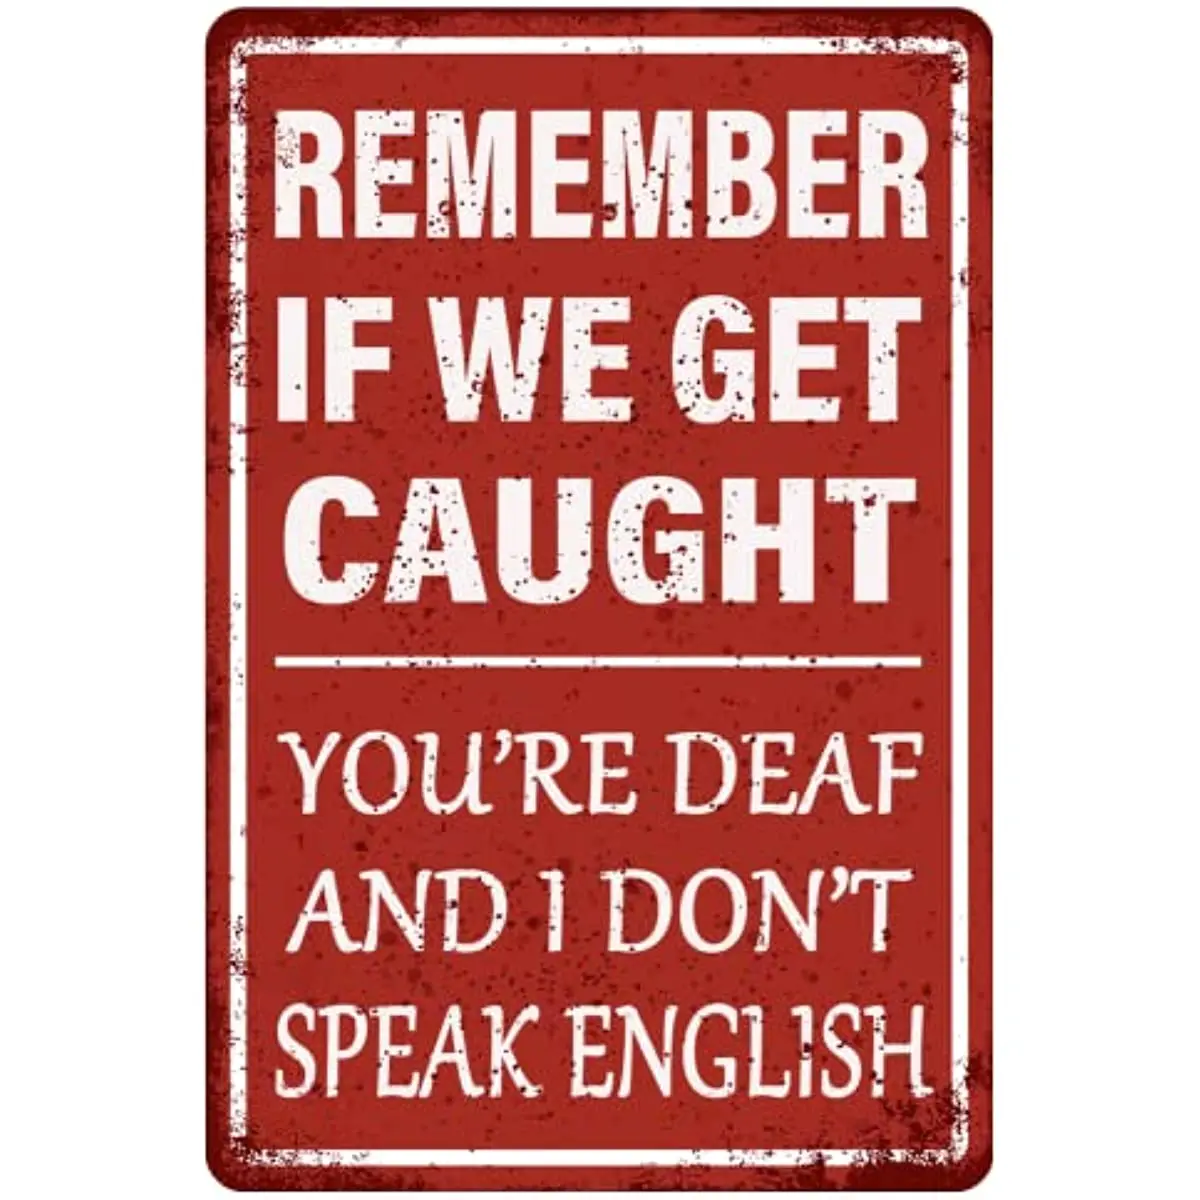 

We Don't Bar If Metal Cave Garage Decor Humor Sign Signs, Caught Funny And English, Remember You're Tin Deaf Man Speak Get